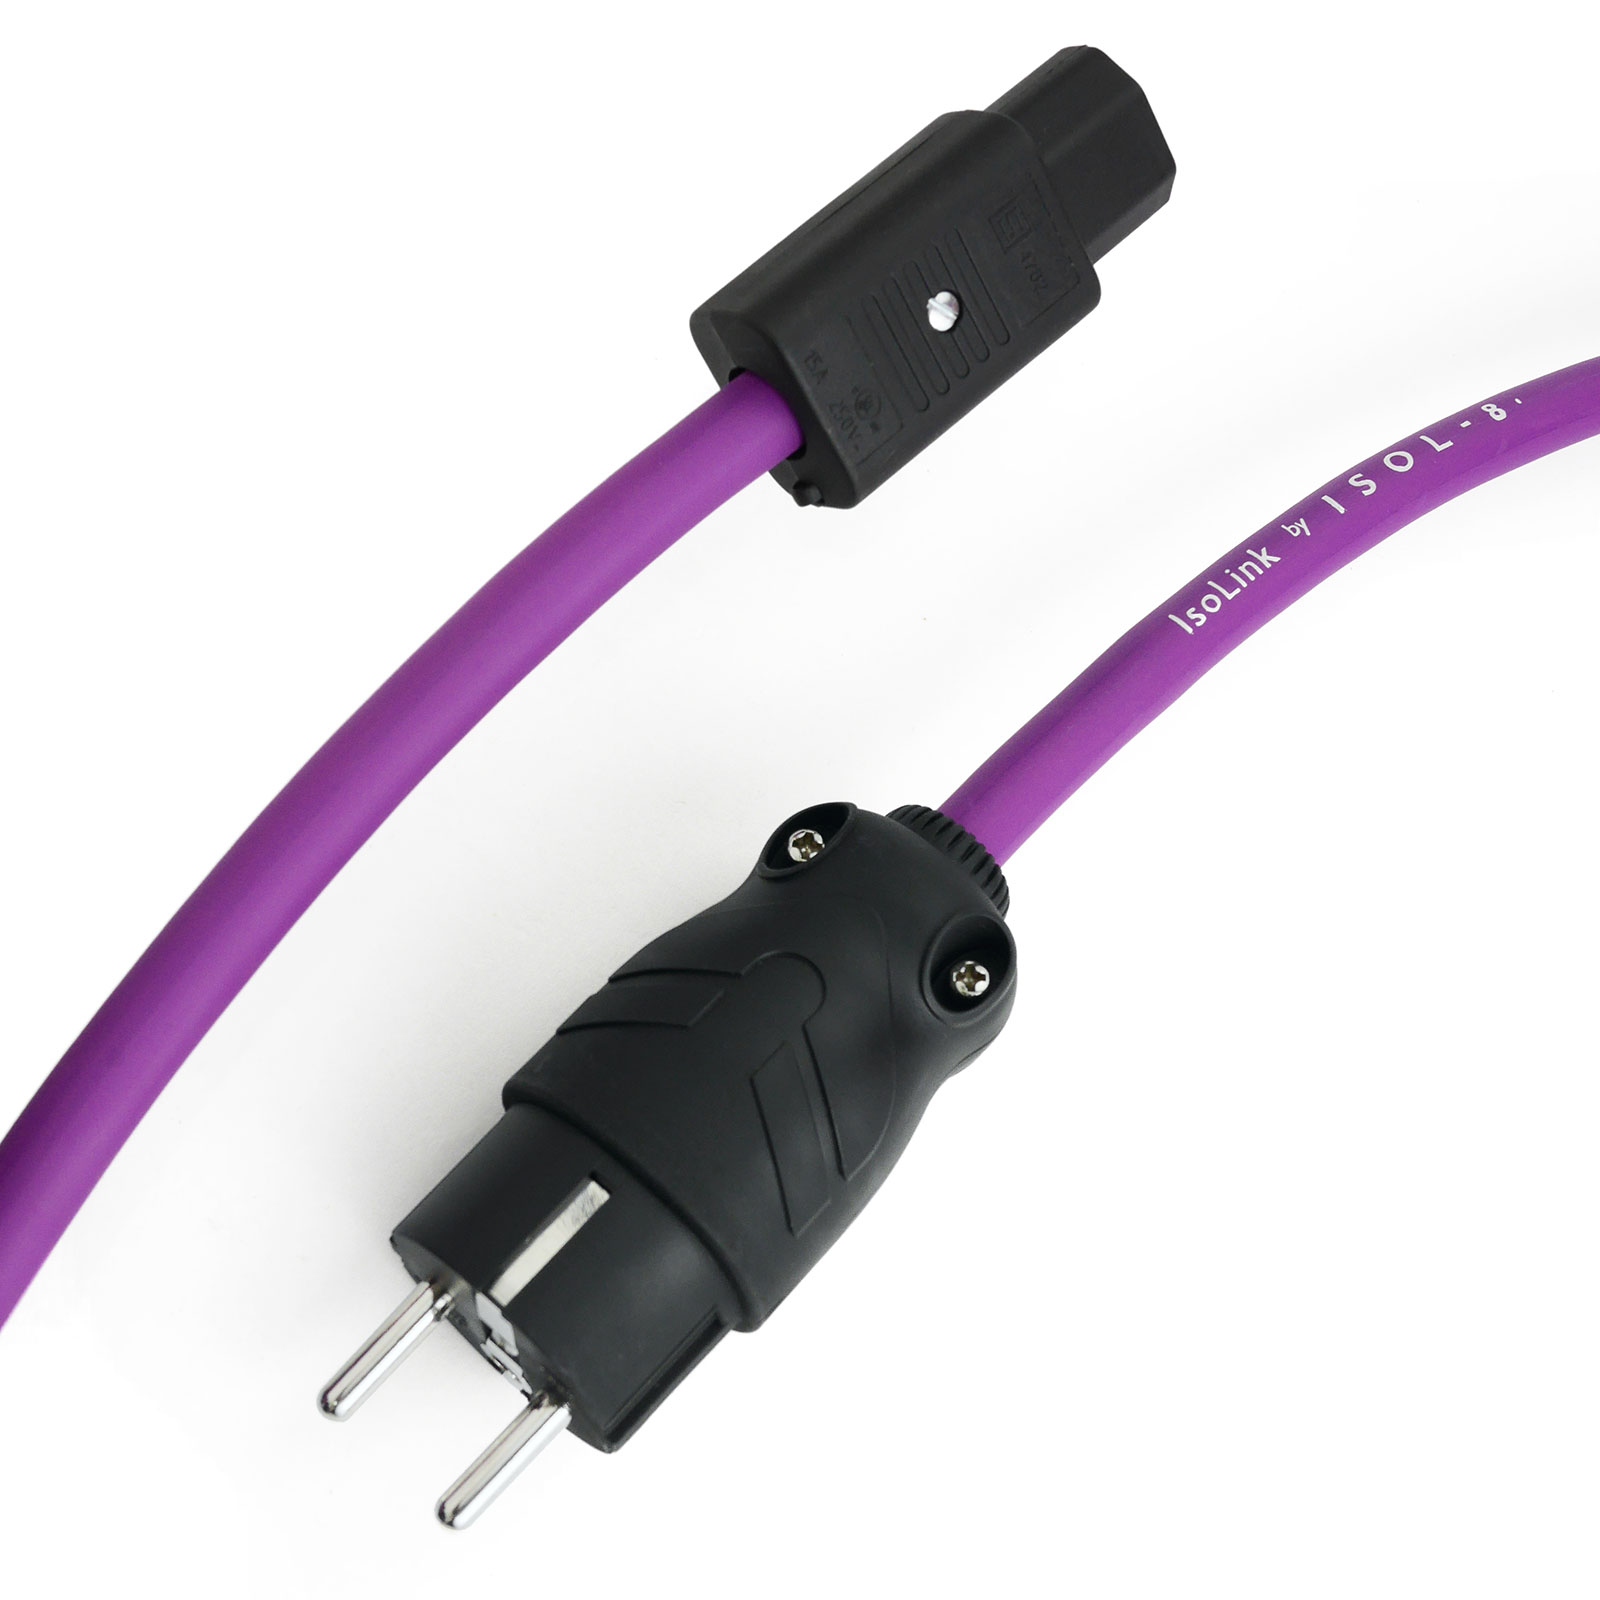 Isol-8 Isolink Ultra 1,5 meter powercord